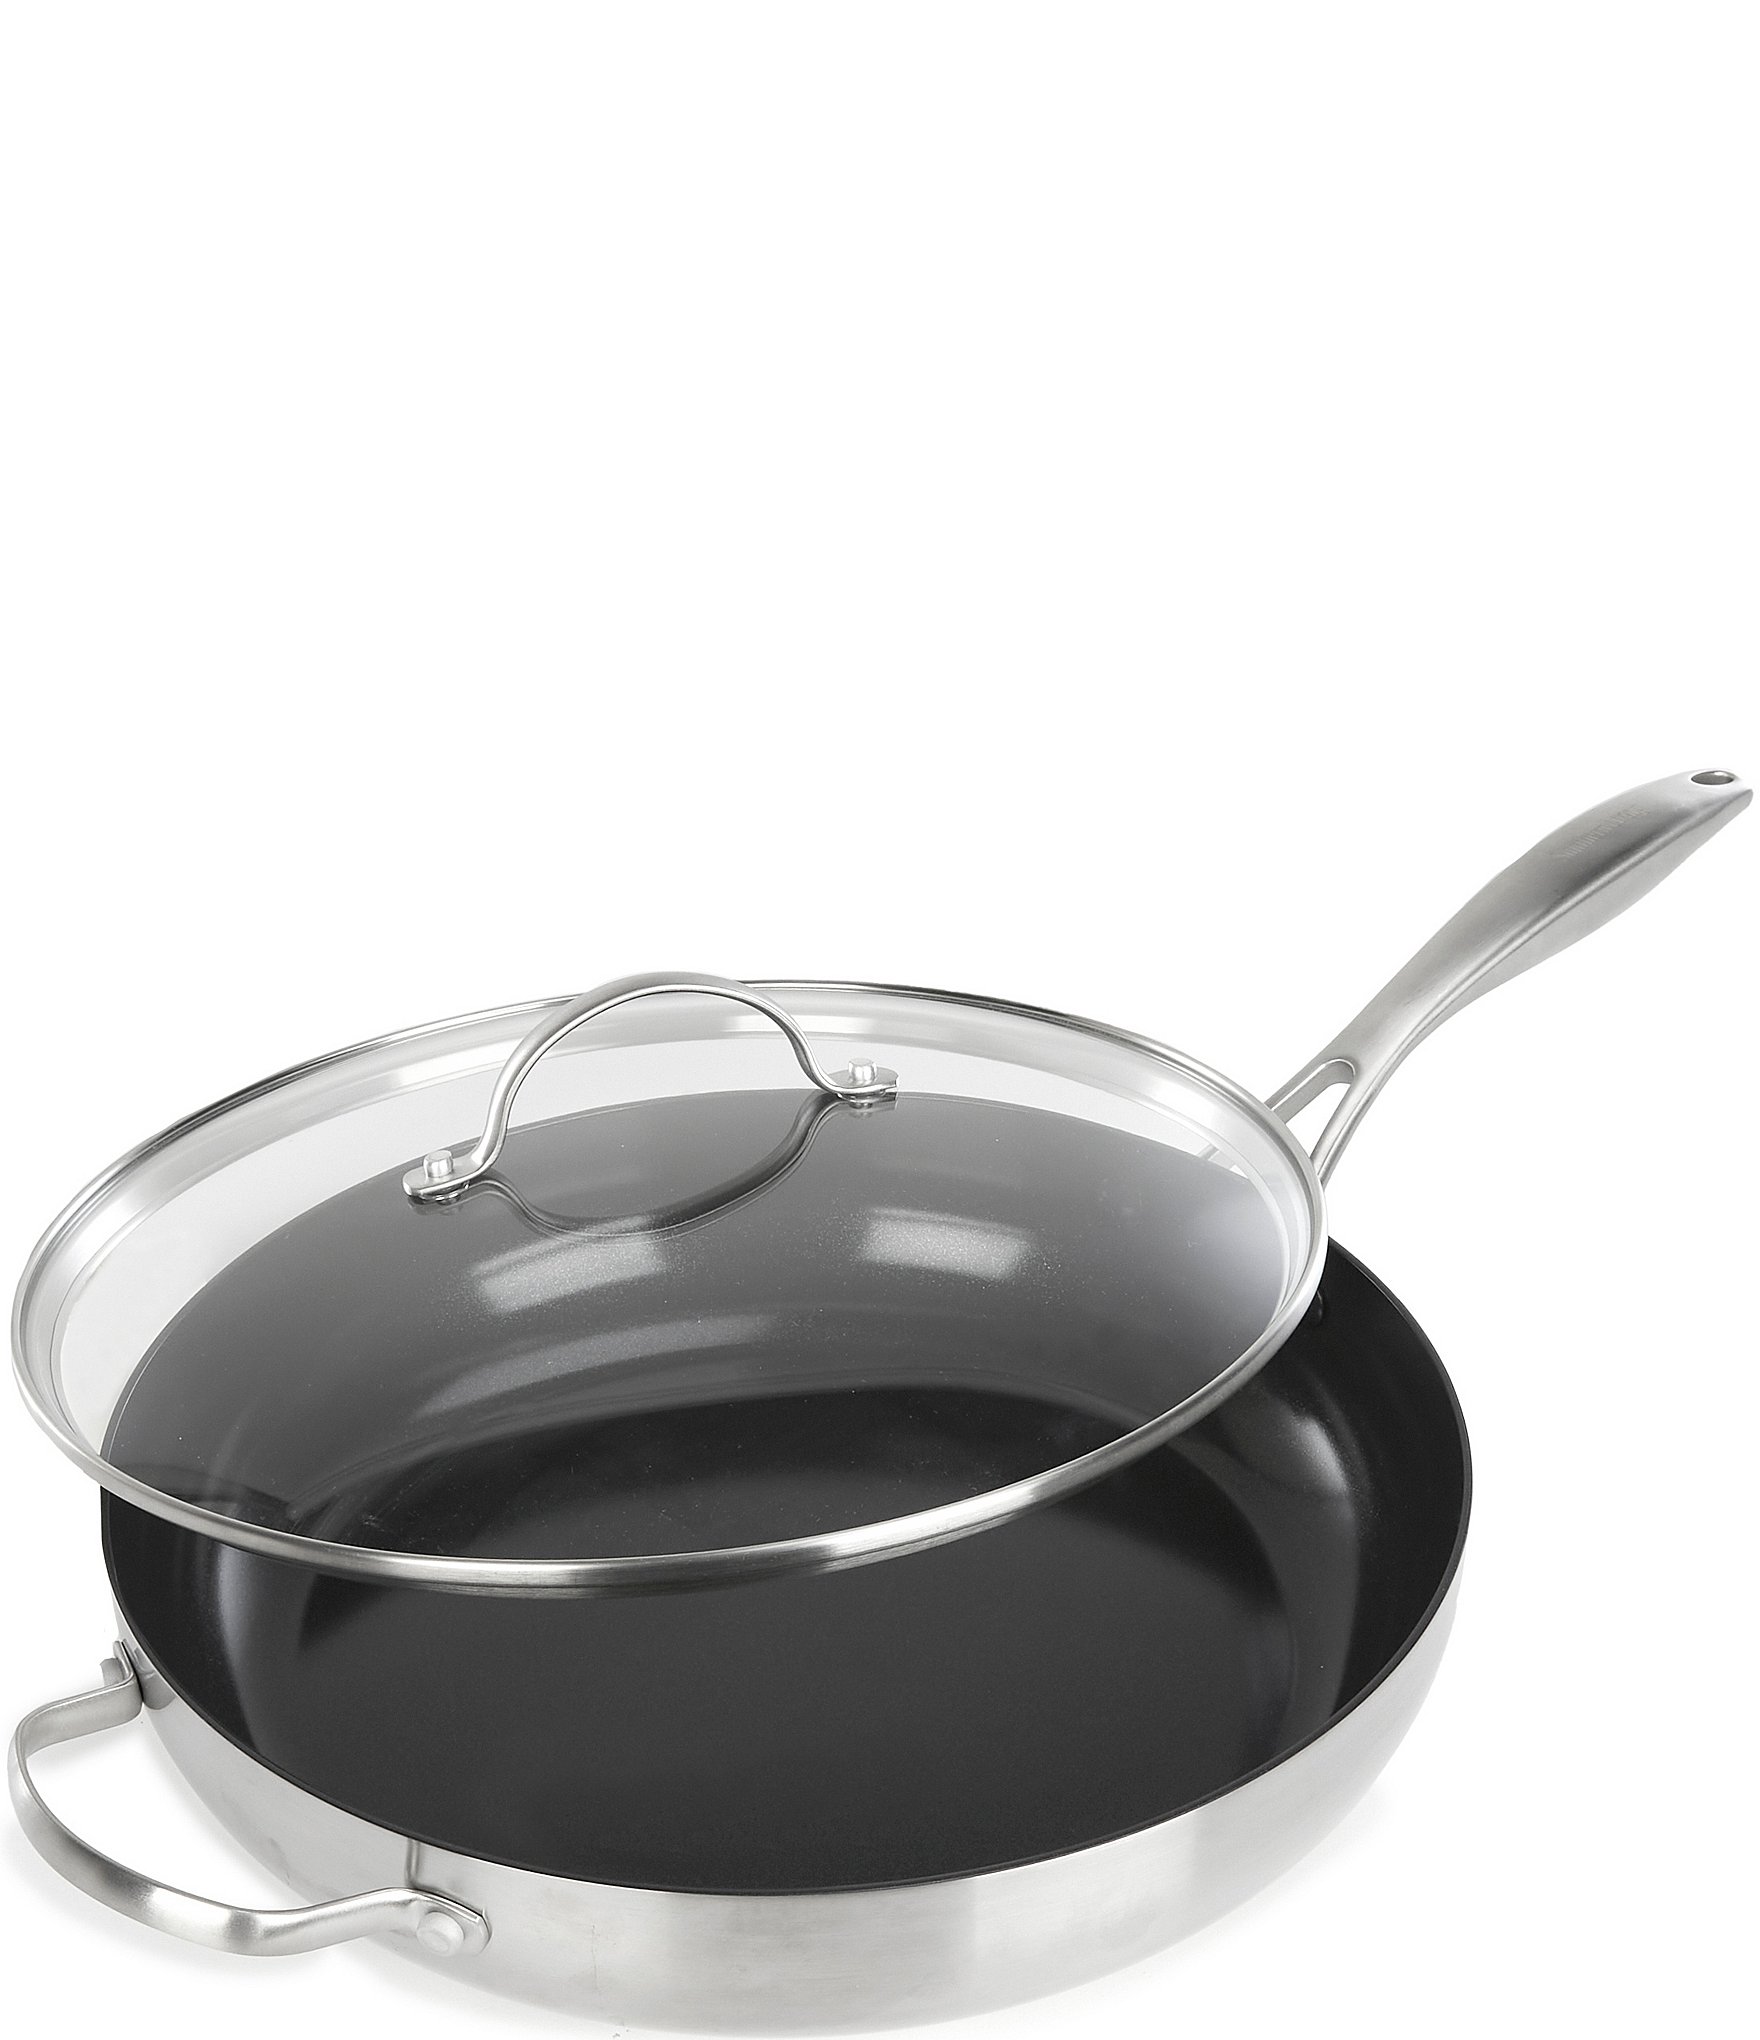 Southern Living by GreenPan Ceramic Nonstick Tri-Ply Stainless Steel 12-Inch Deep Skillet